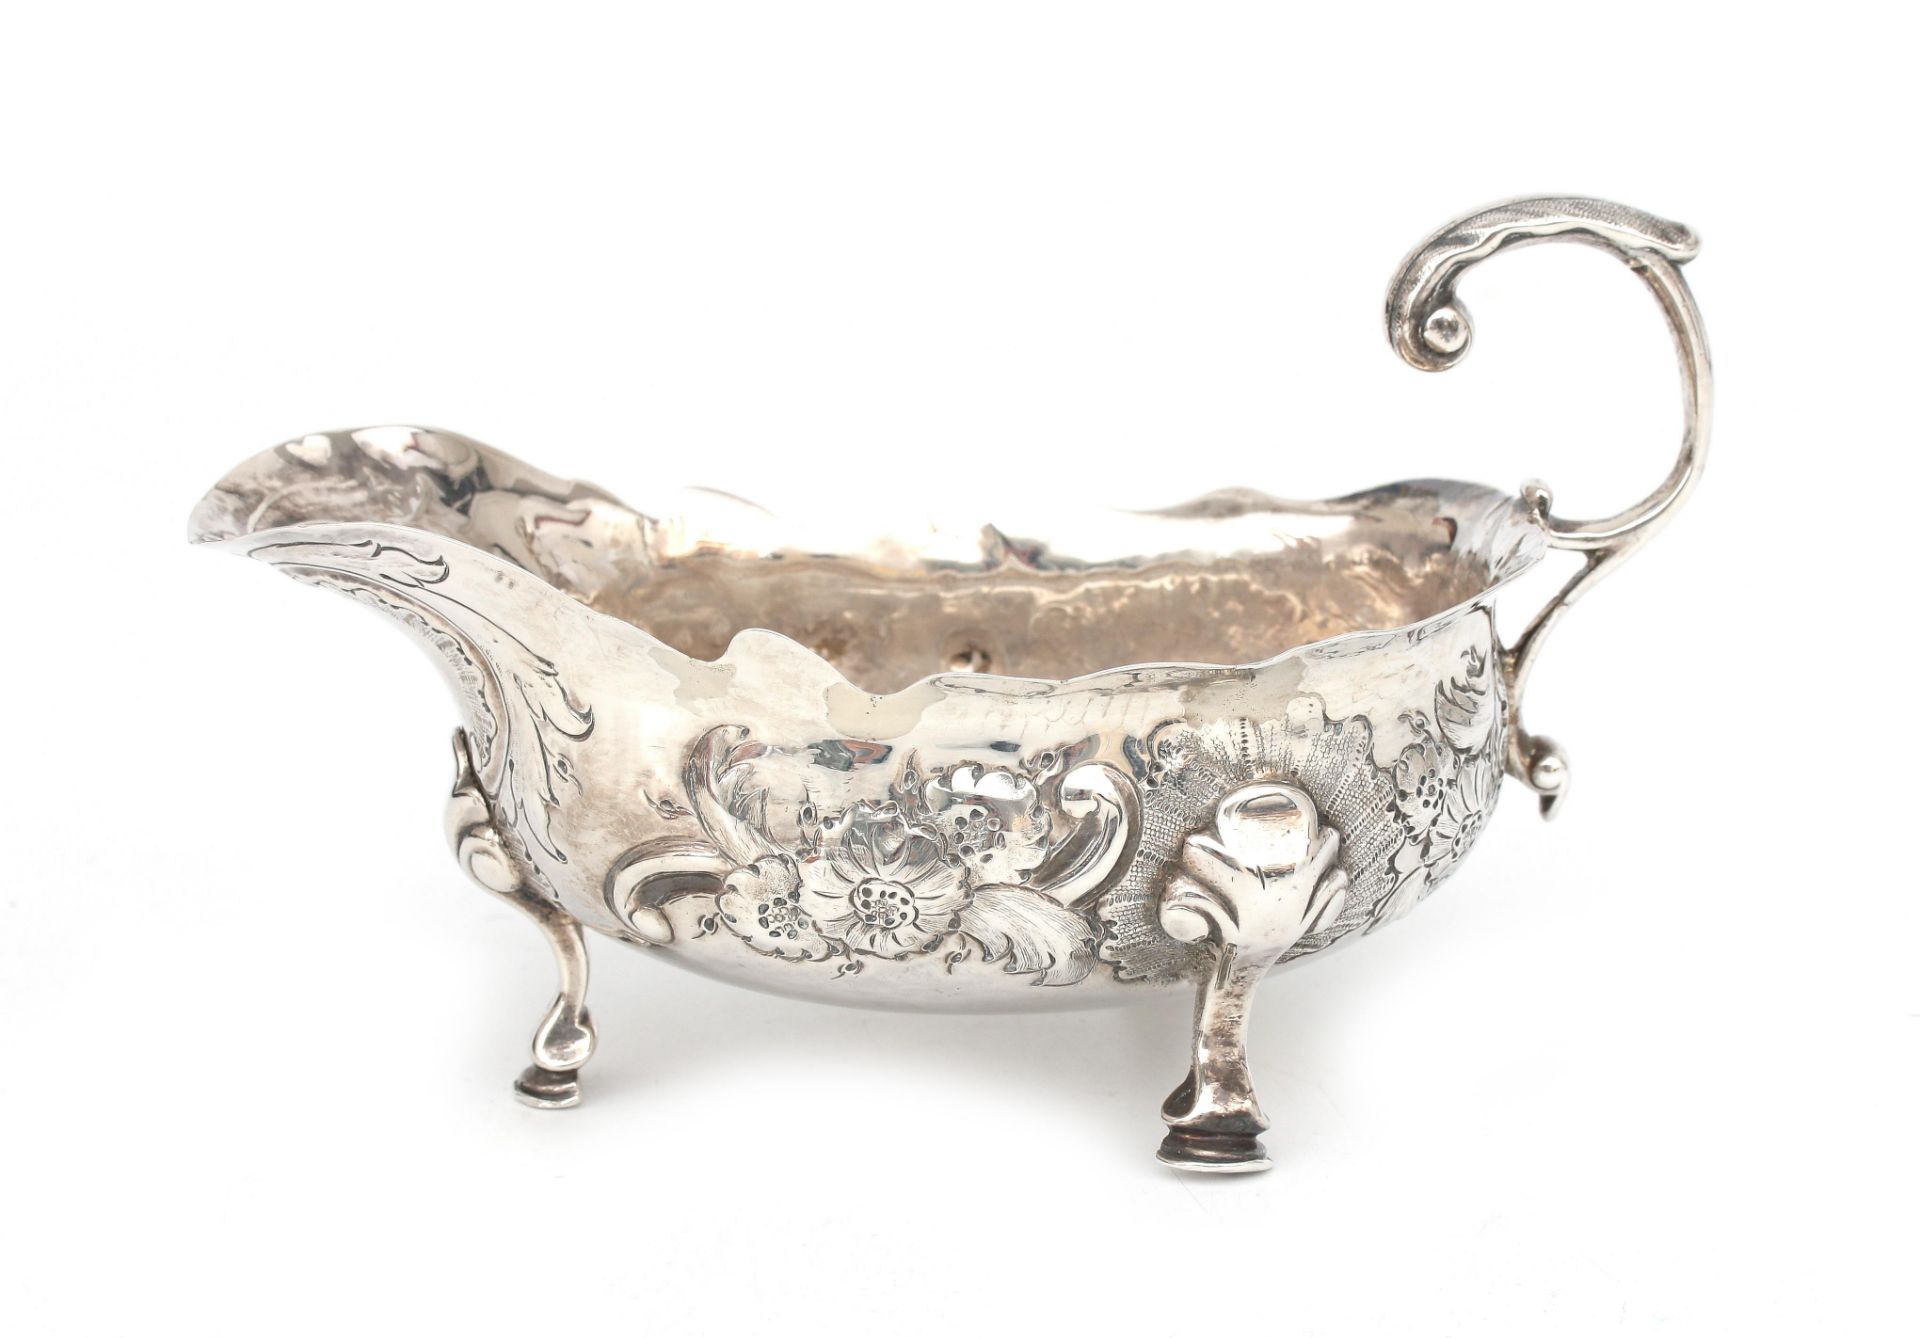 An 925 silver gravy boat on three feet with embossed- and engraved floral decoration, Robert Brown,